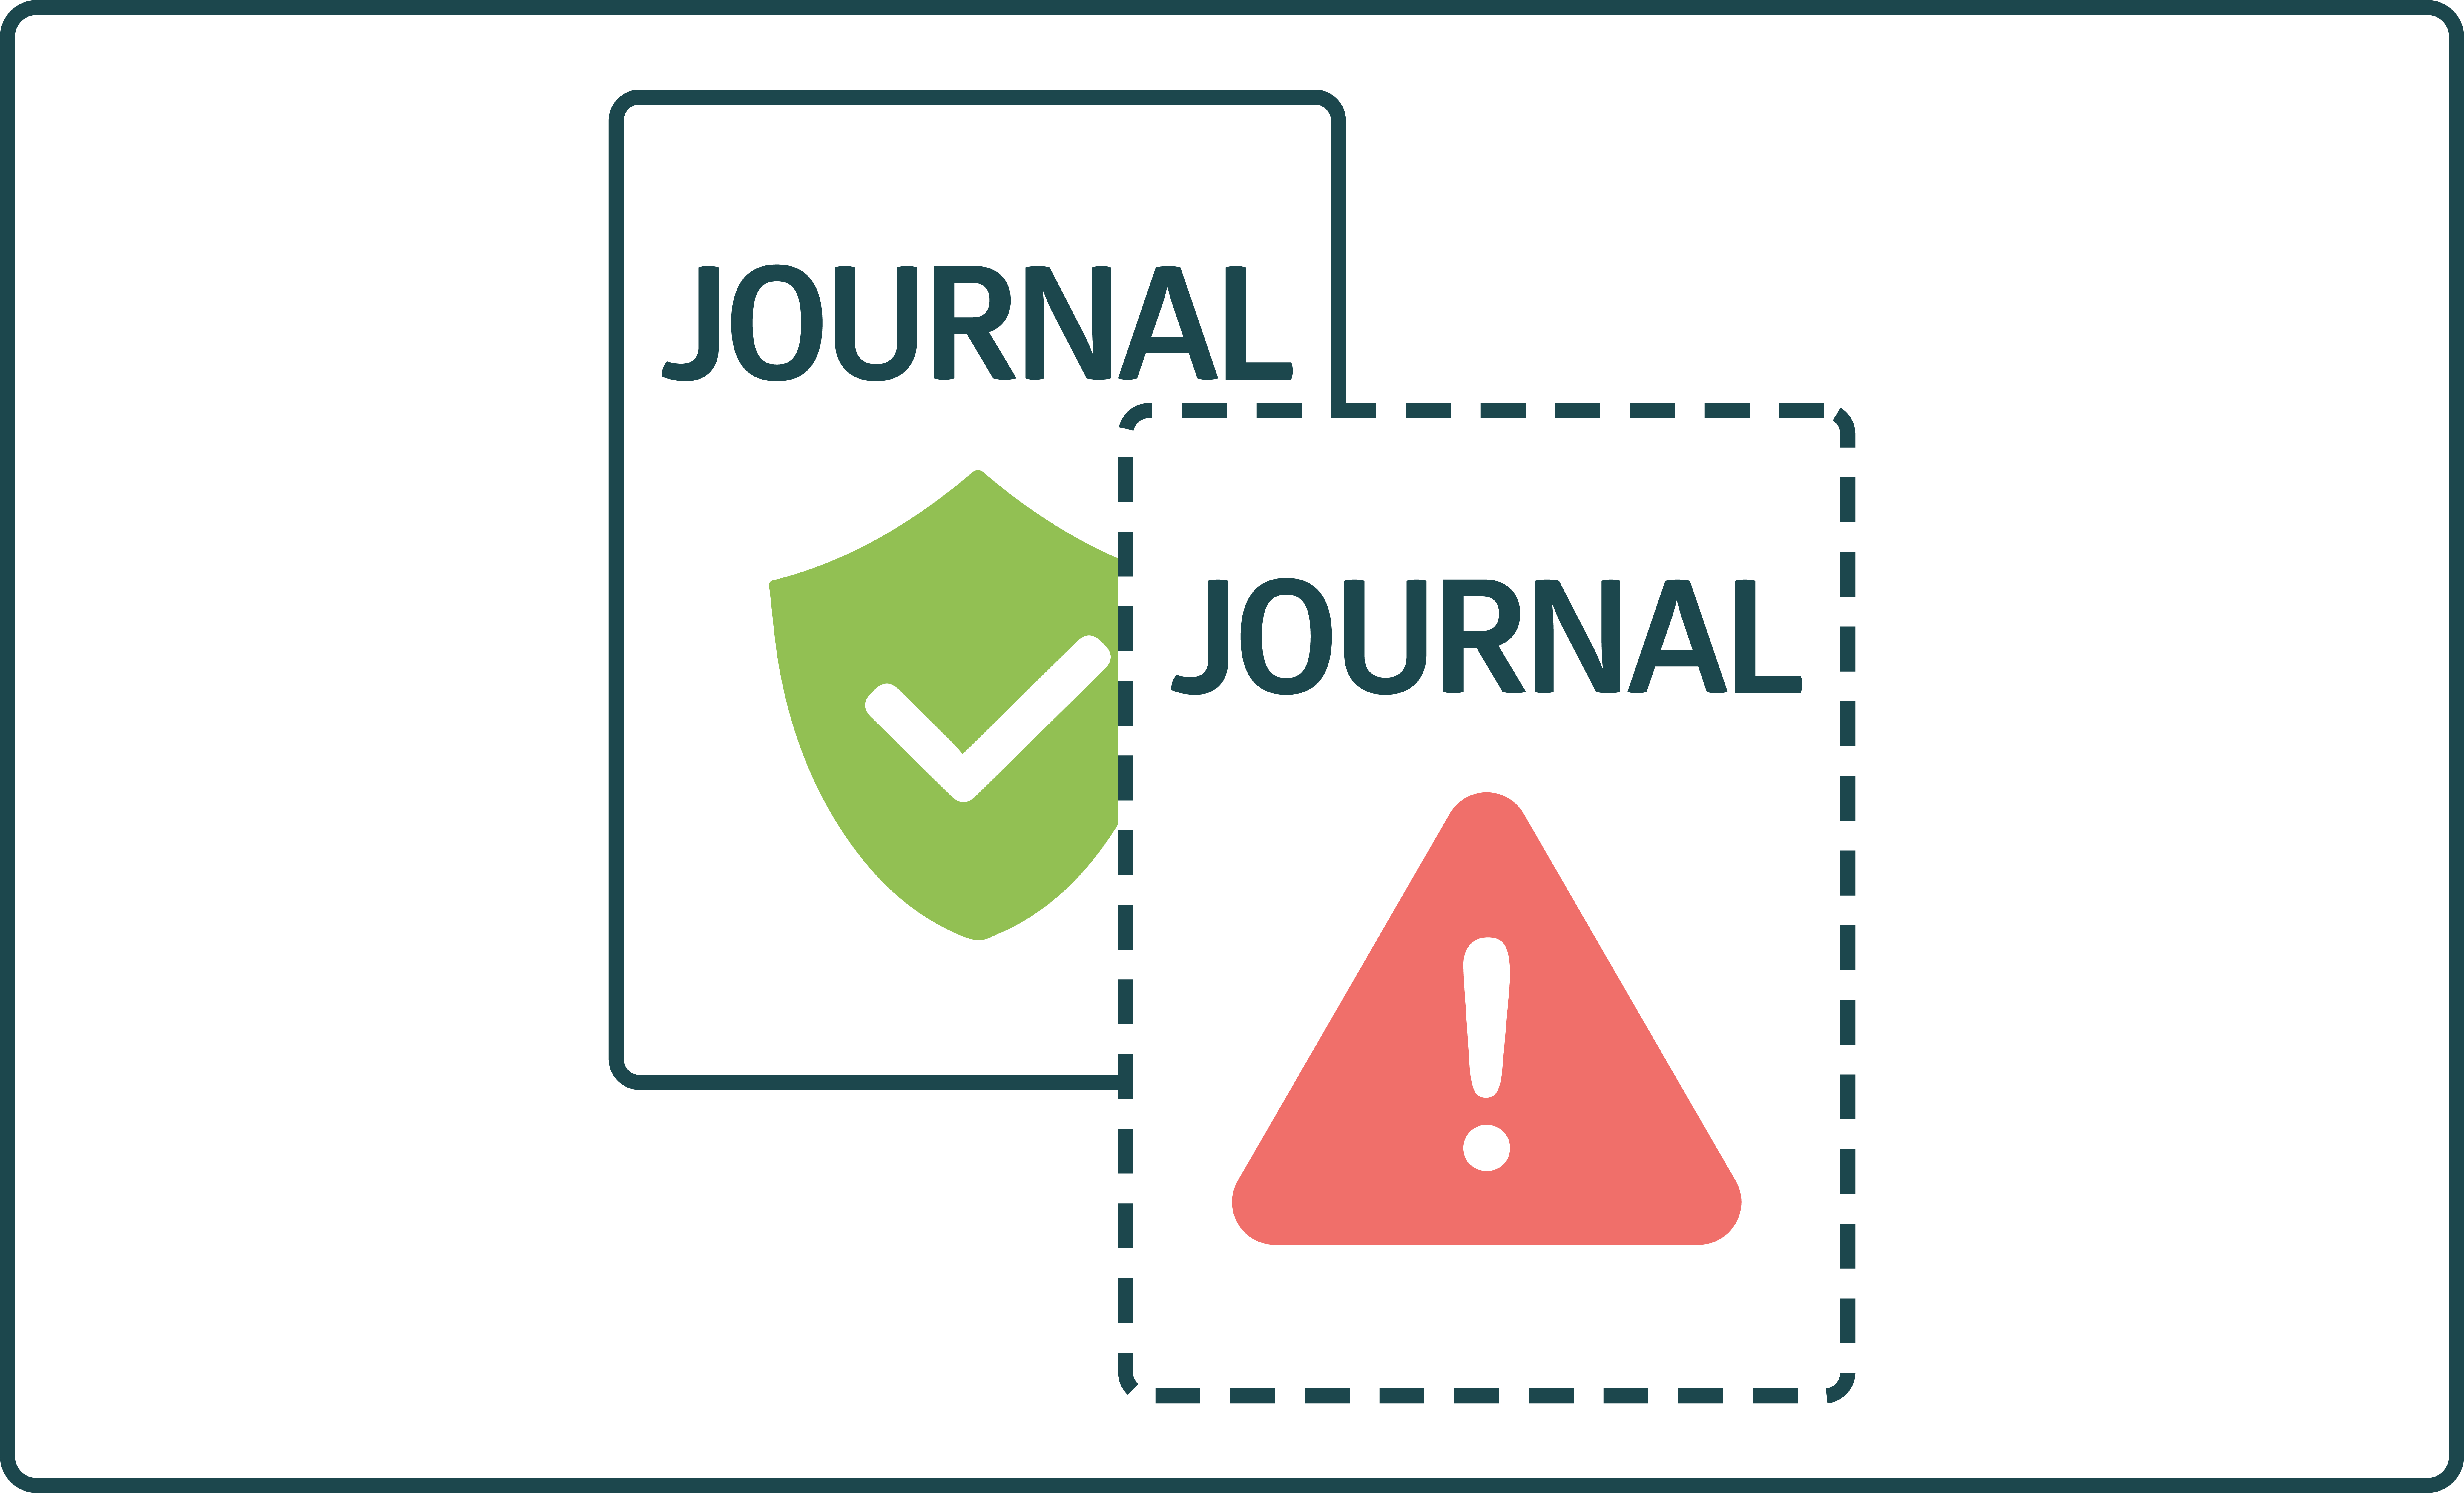 Hijacked or cloned journals that researchers should avoid publishing their research papers in